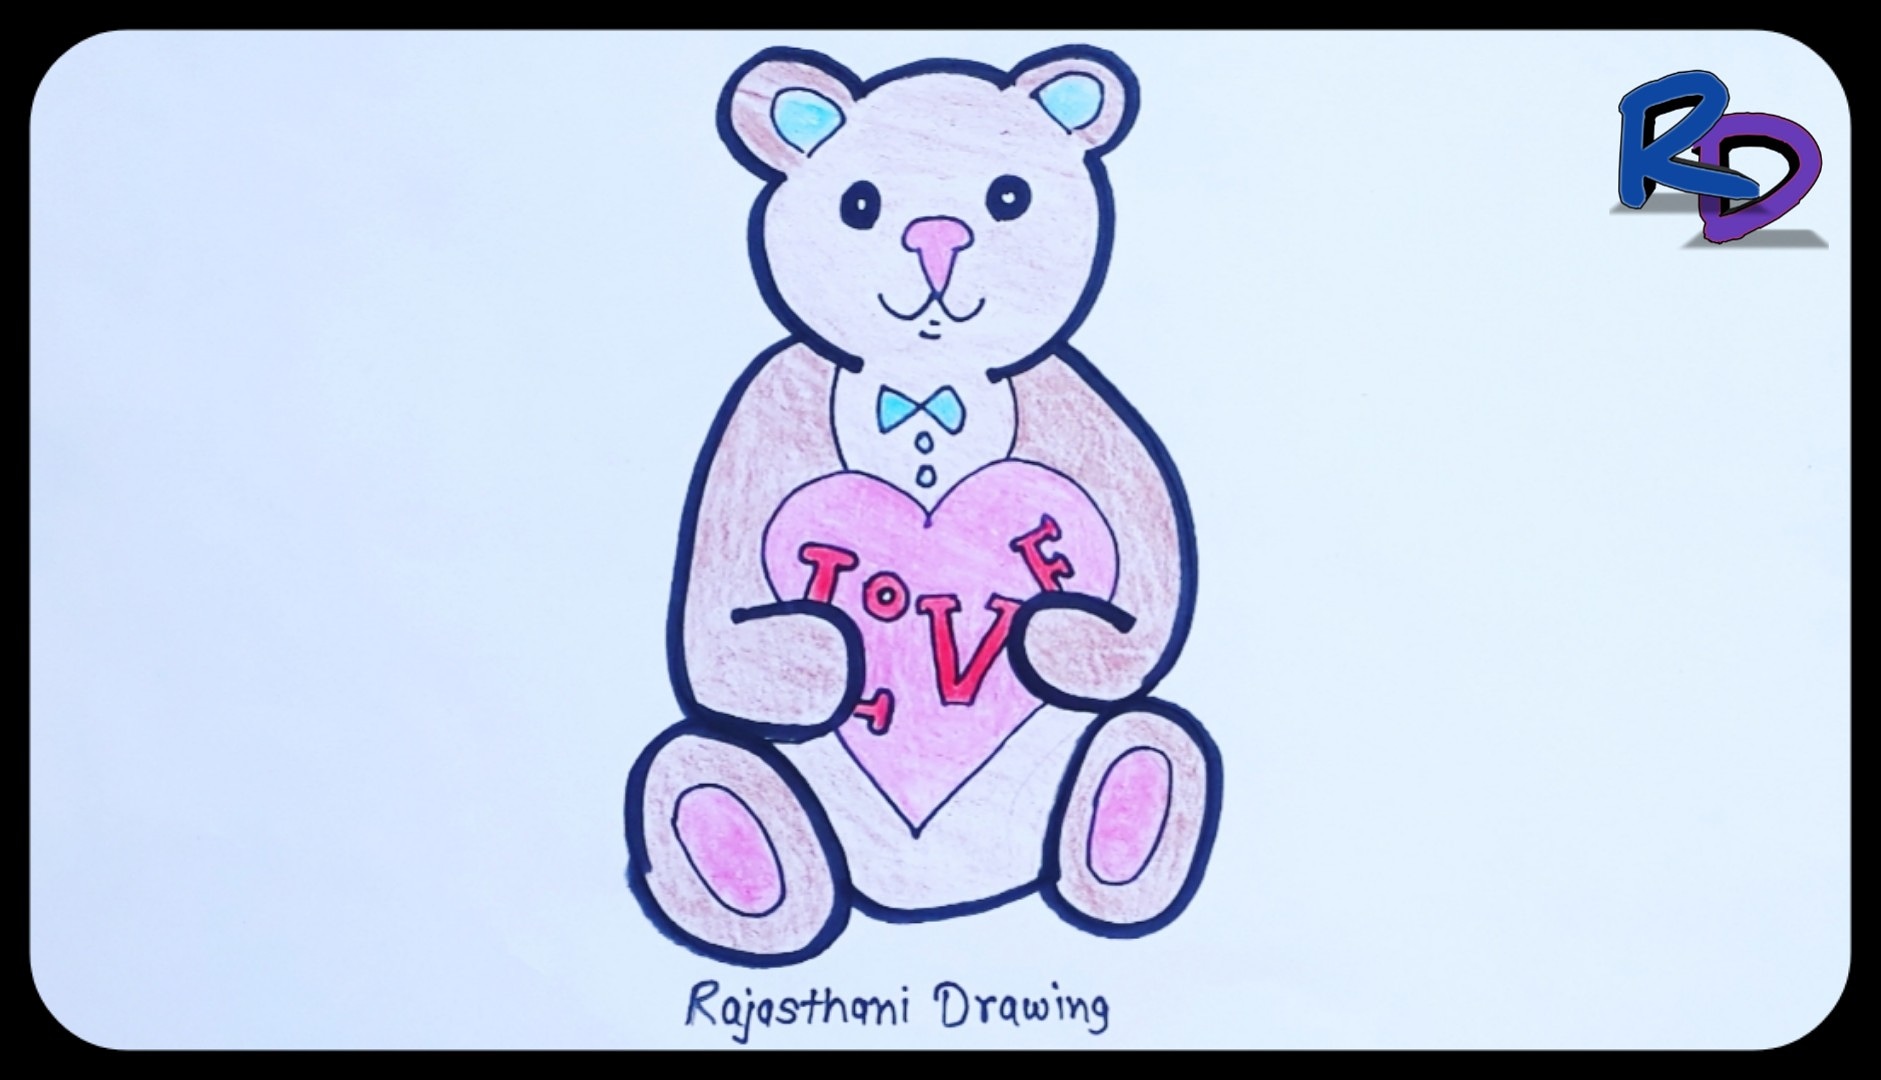 How To Draw A Teddy Bear Step by Step - [7 Easy Phase] & [Video]